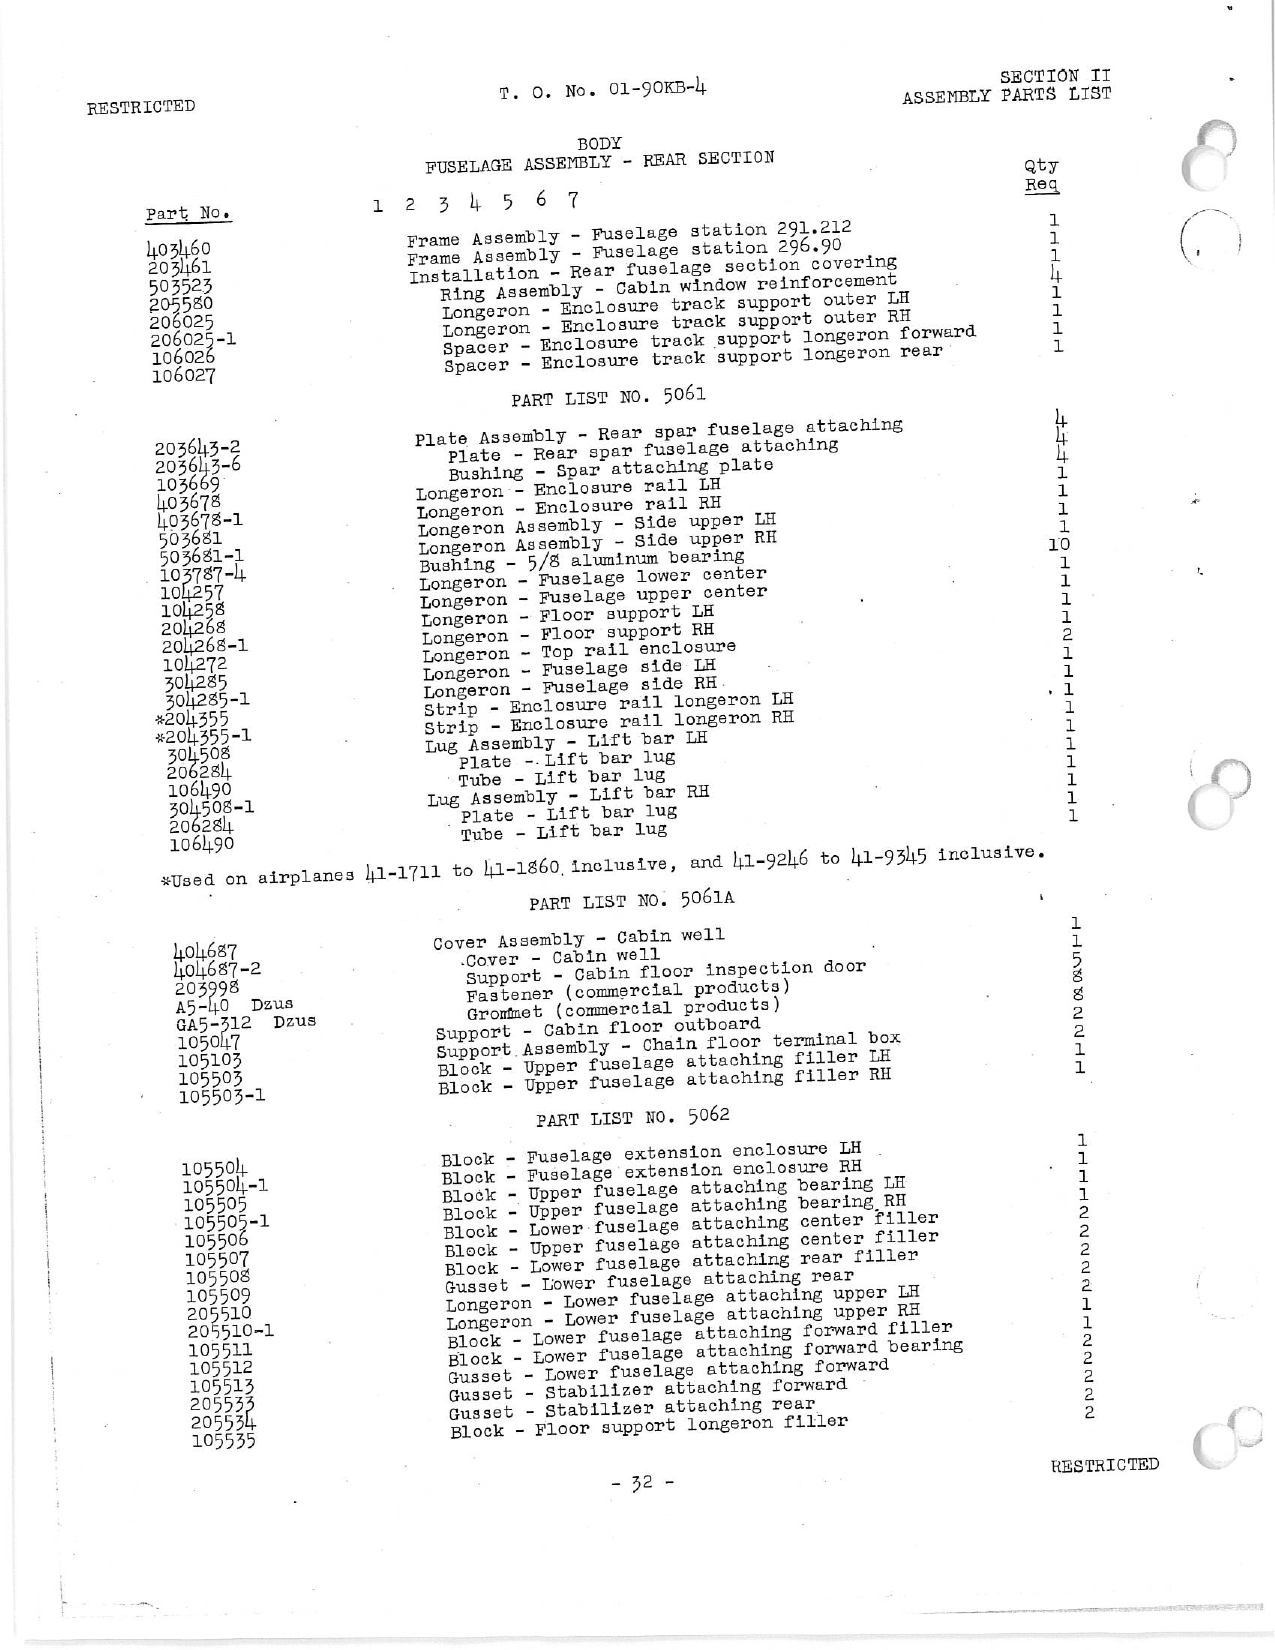 Sample page 35 from AirCorps Library document: Parts Catalog: AT-10